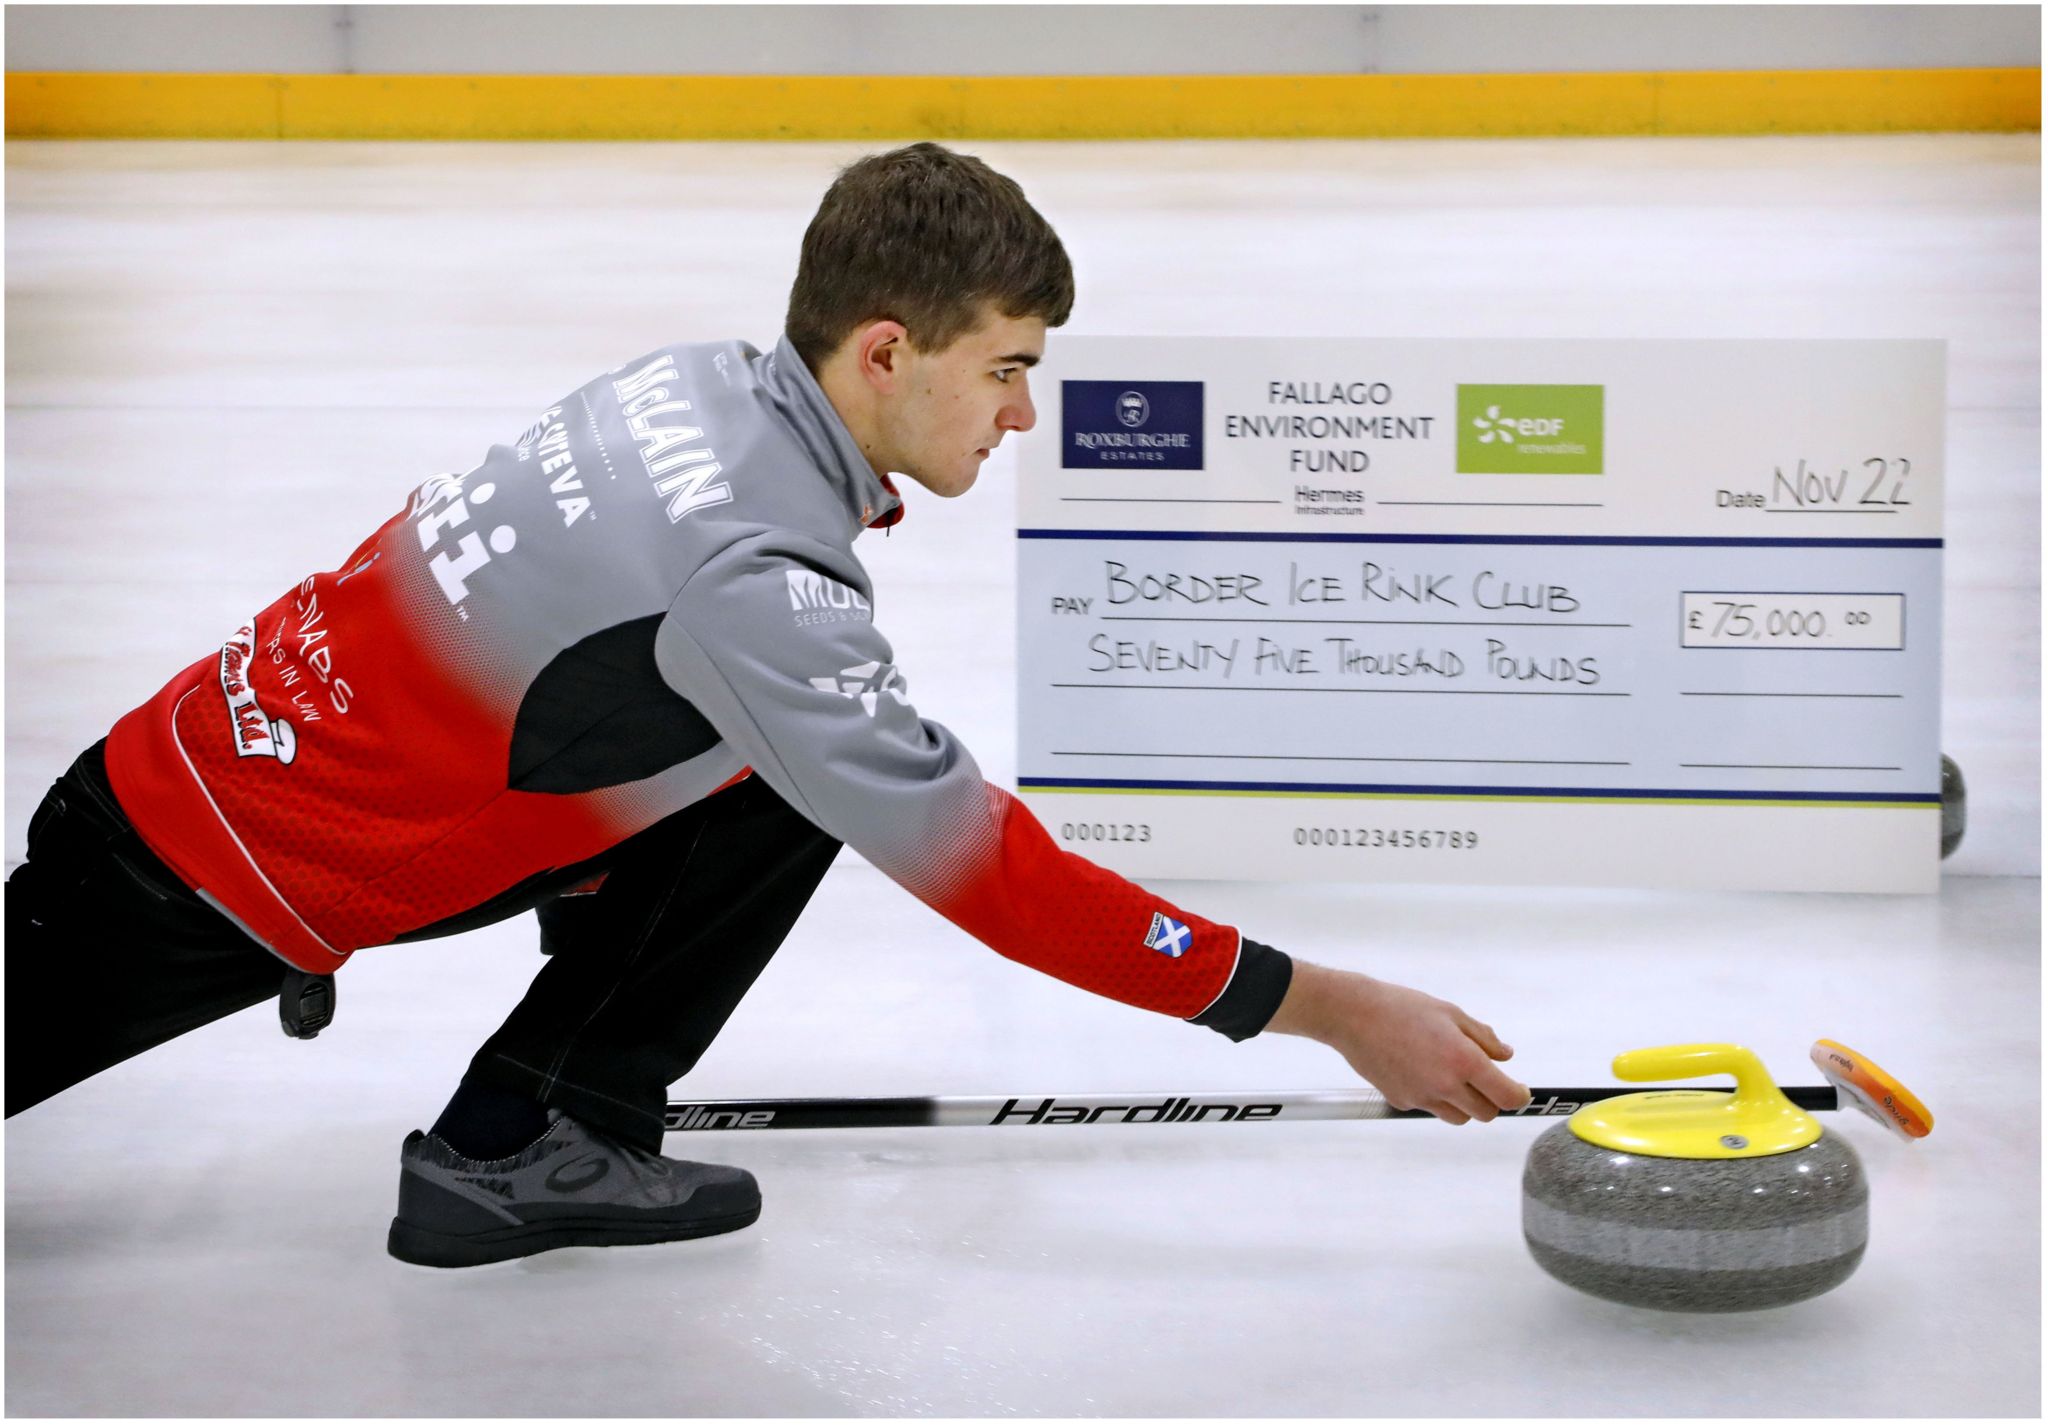 Calum McLain curling at the Borders Ice Rink this week.